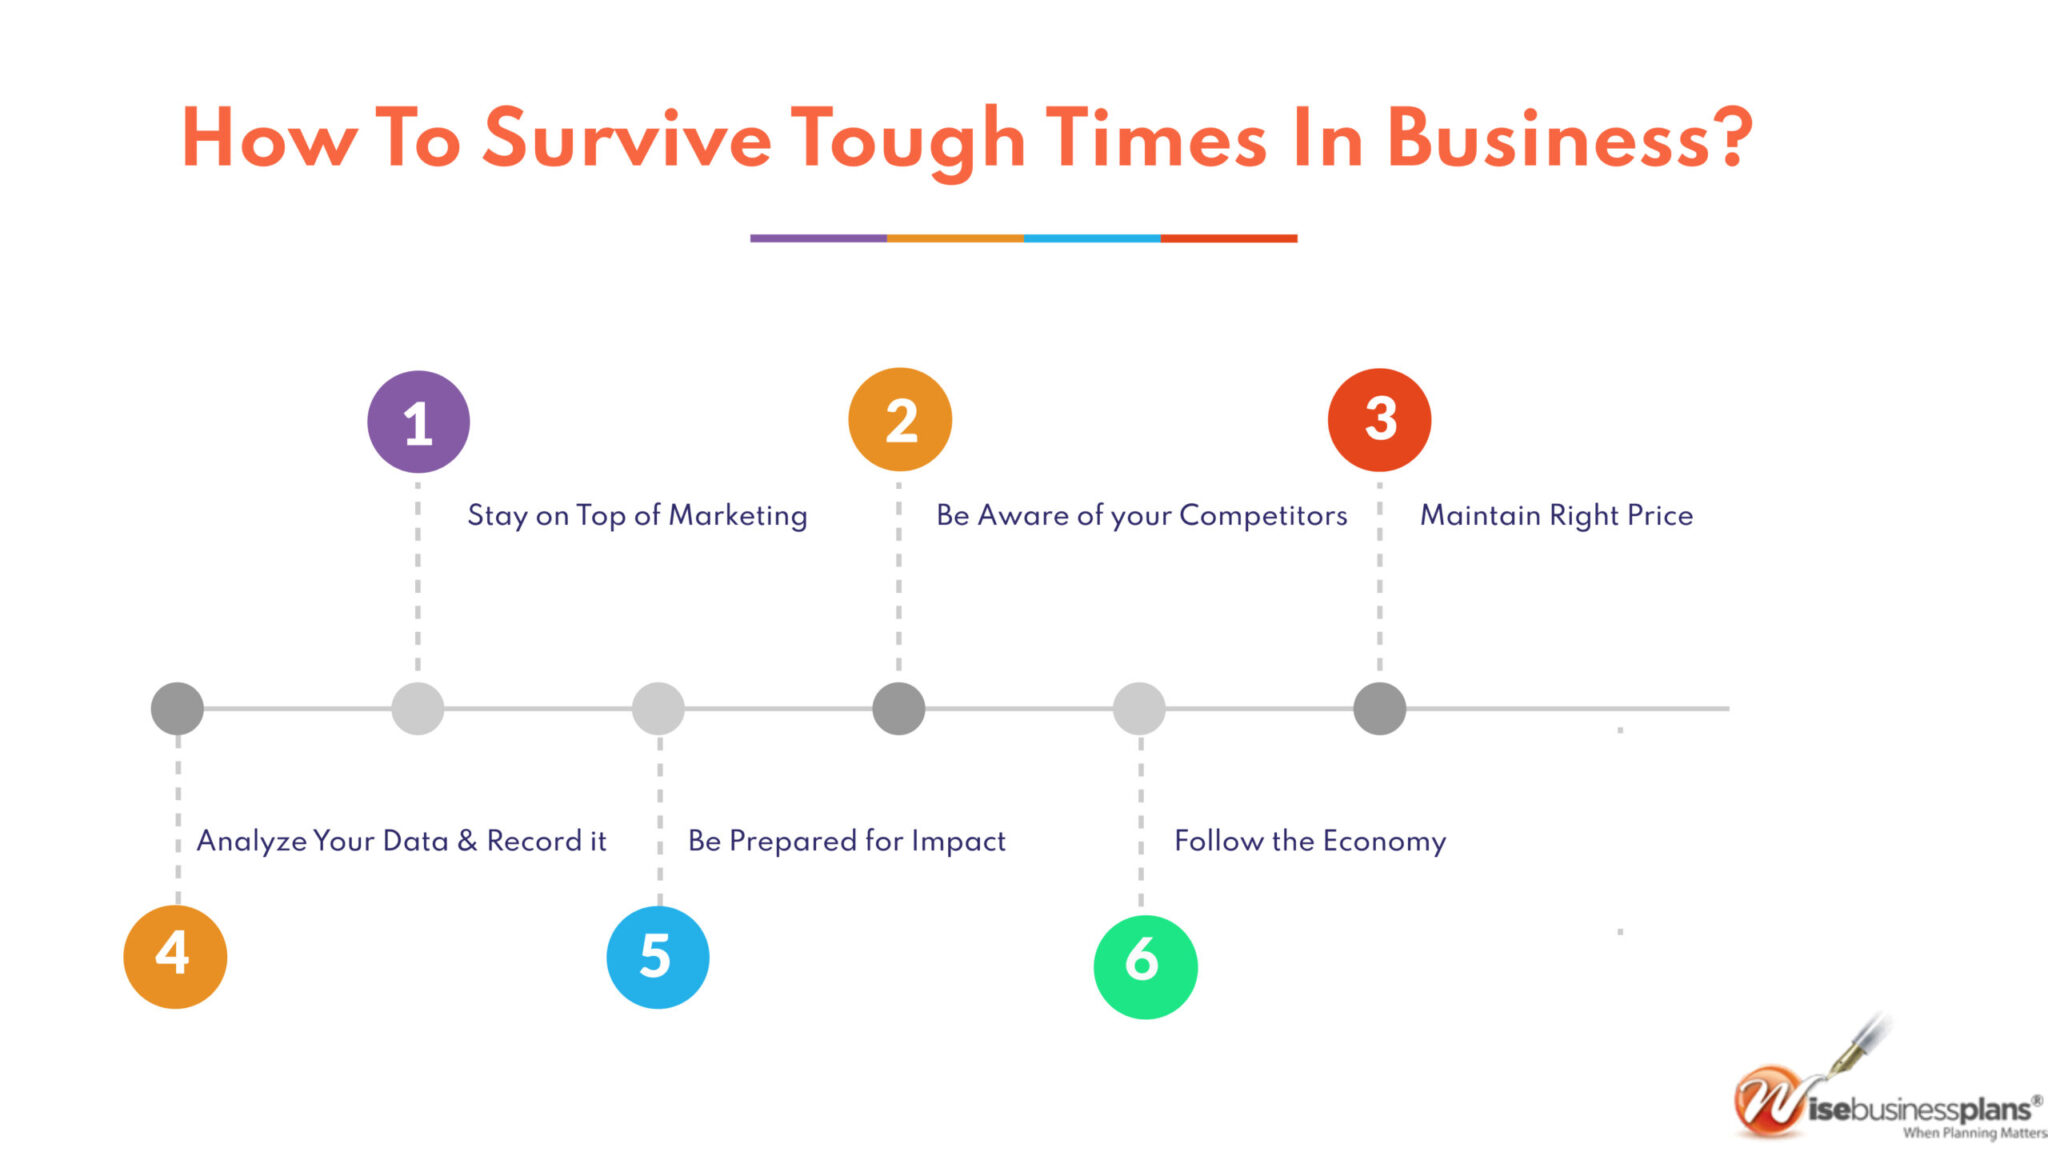 How to survive tough times in business